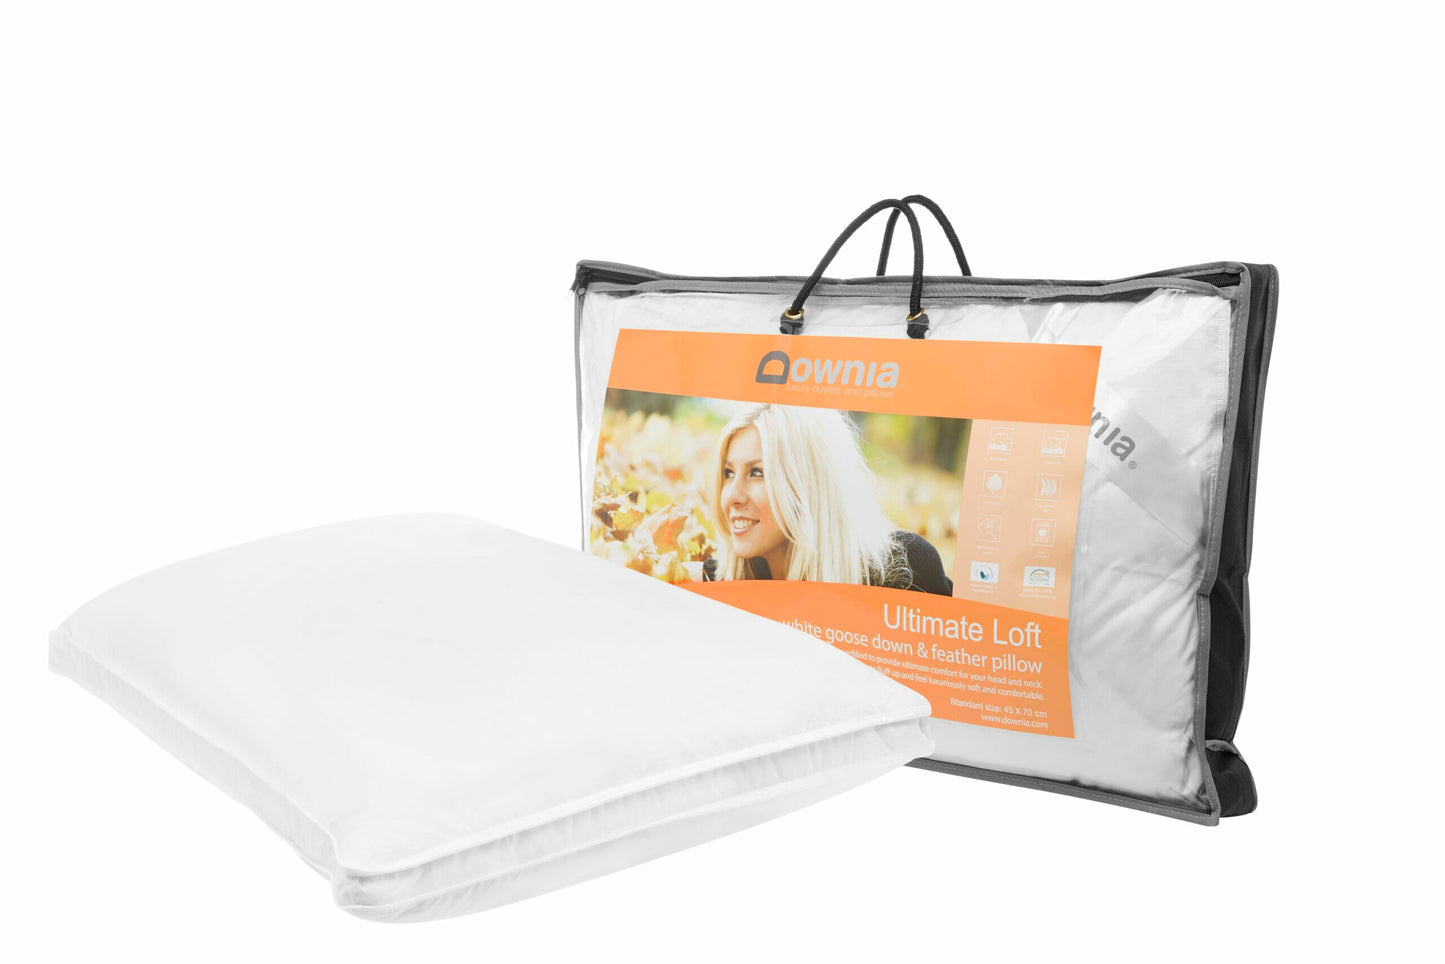 Downia ULTIMATE LOFT 50% White Goose Down and Feather Pillow